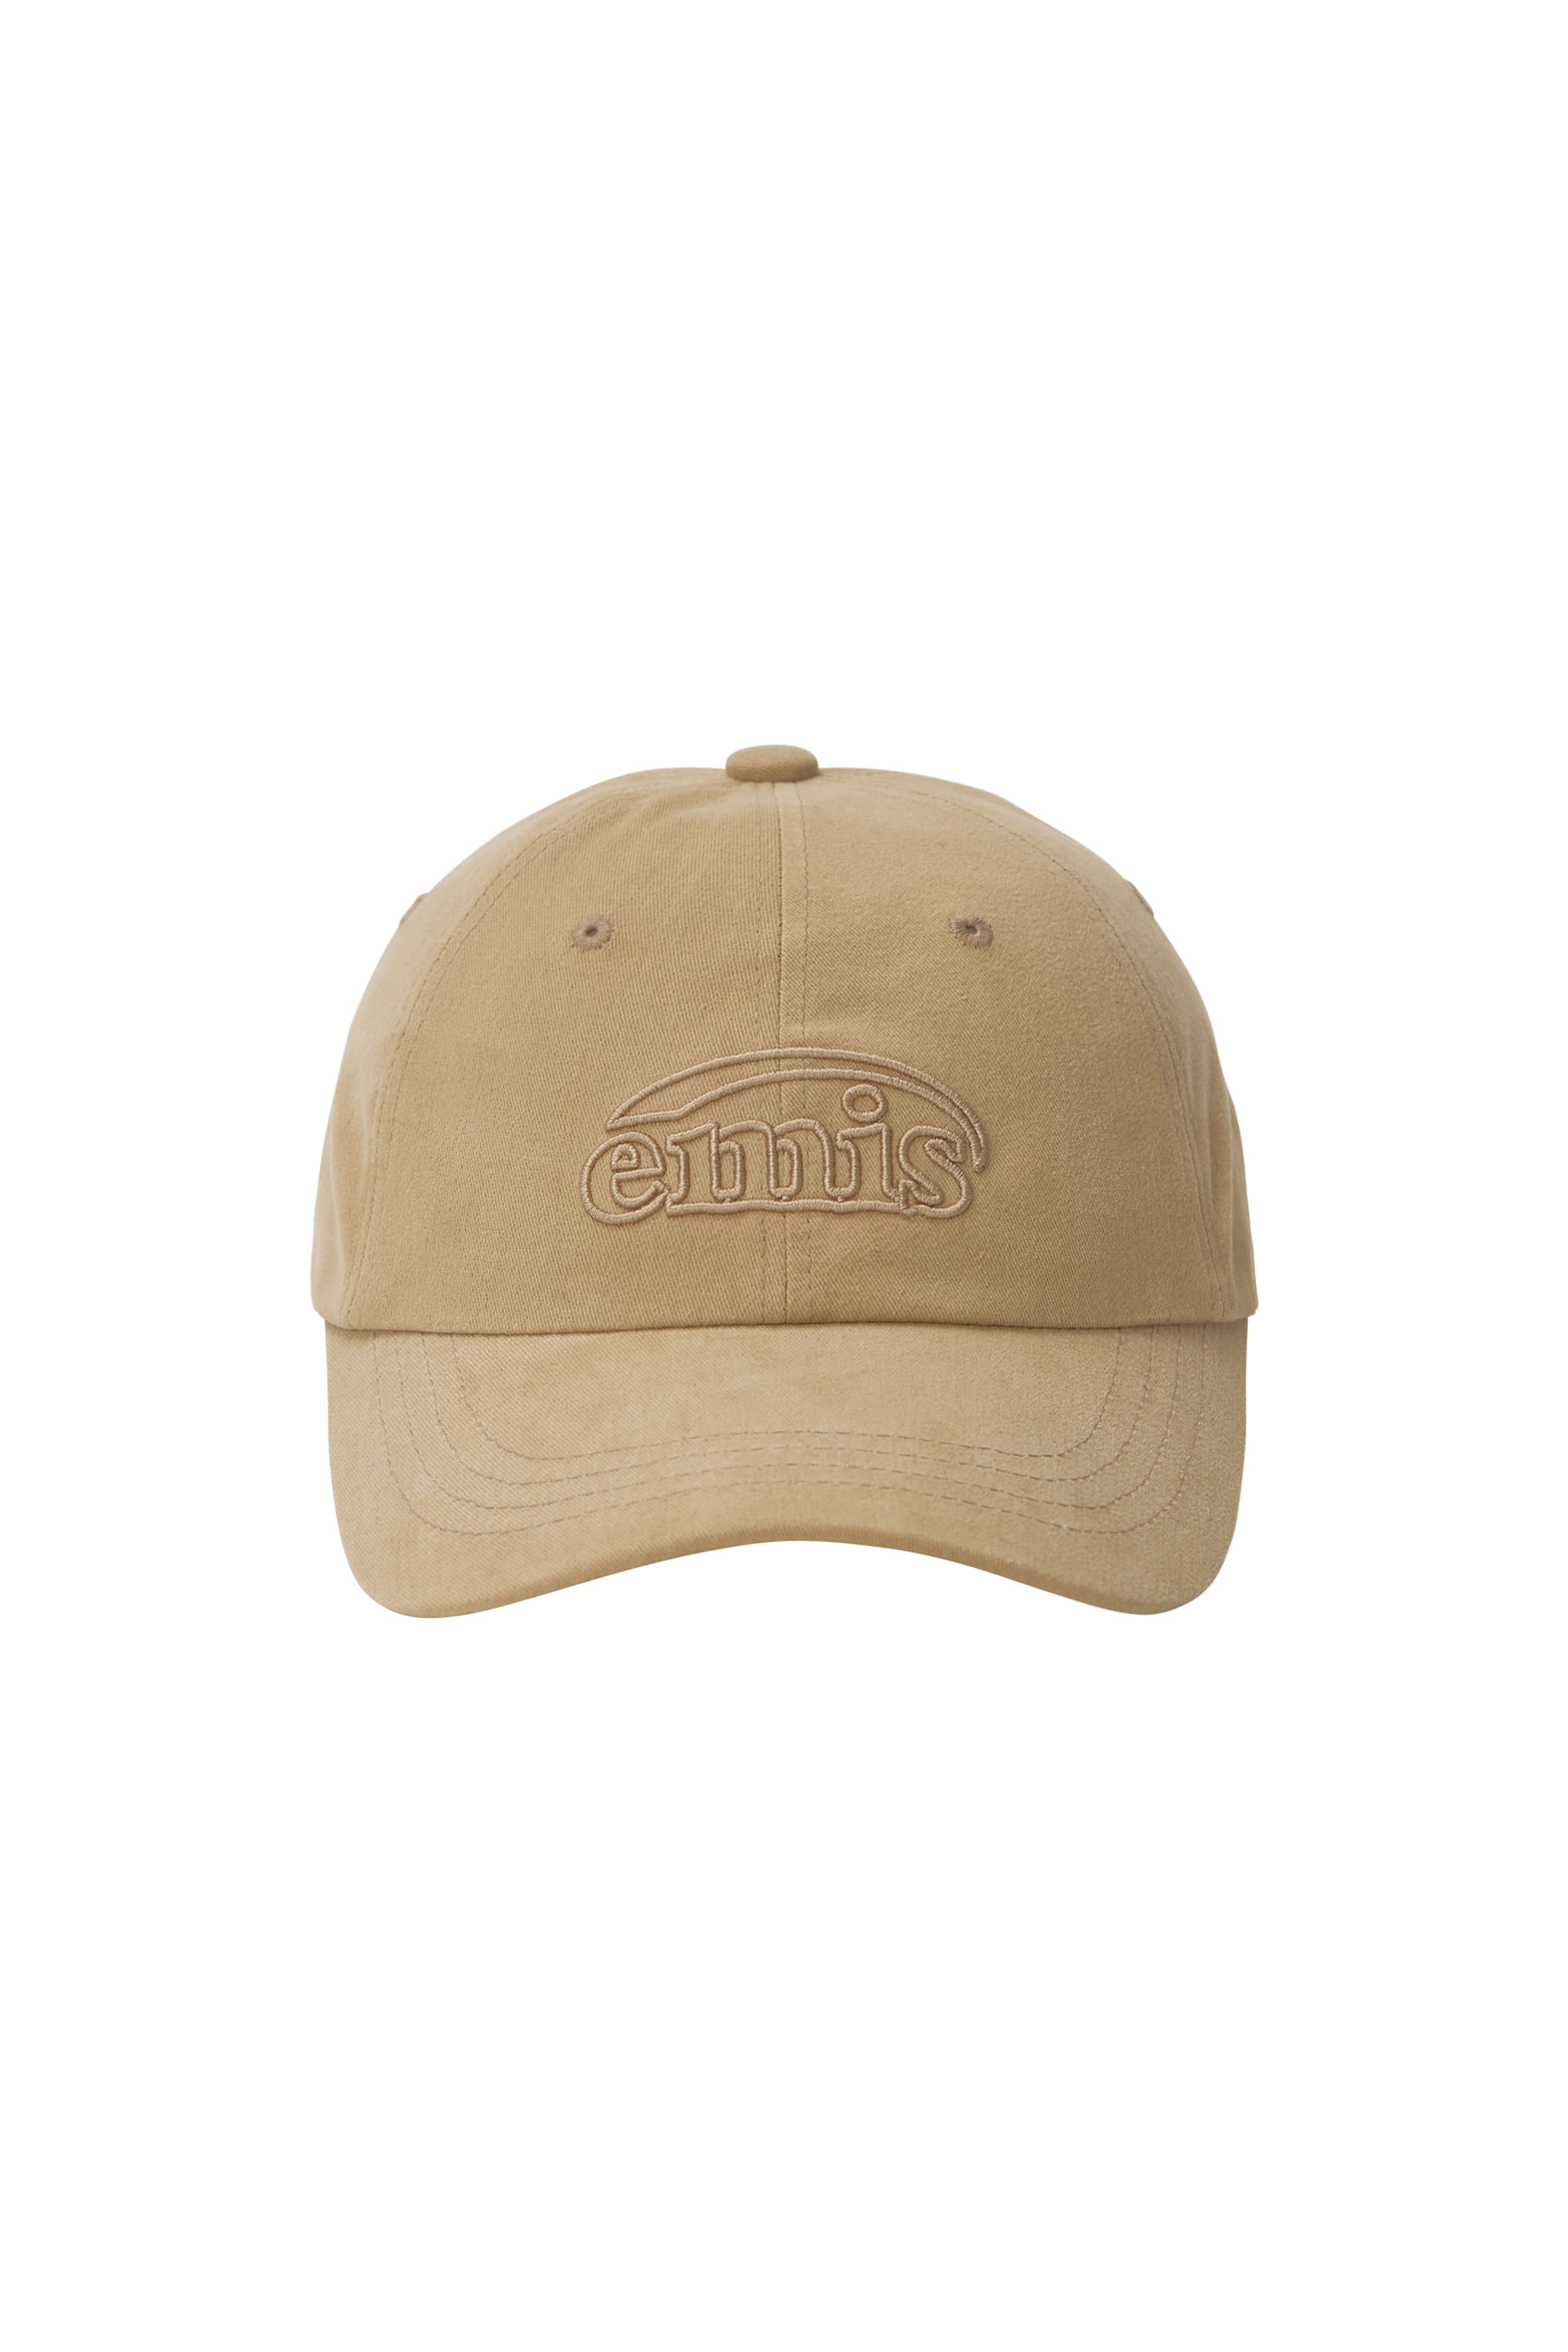 COTTON BRUSHED BALL CAP-BEIGE